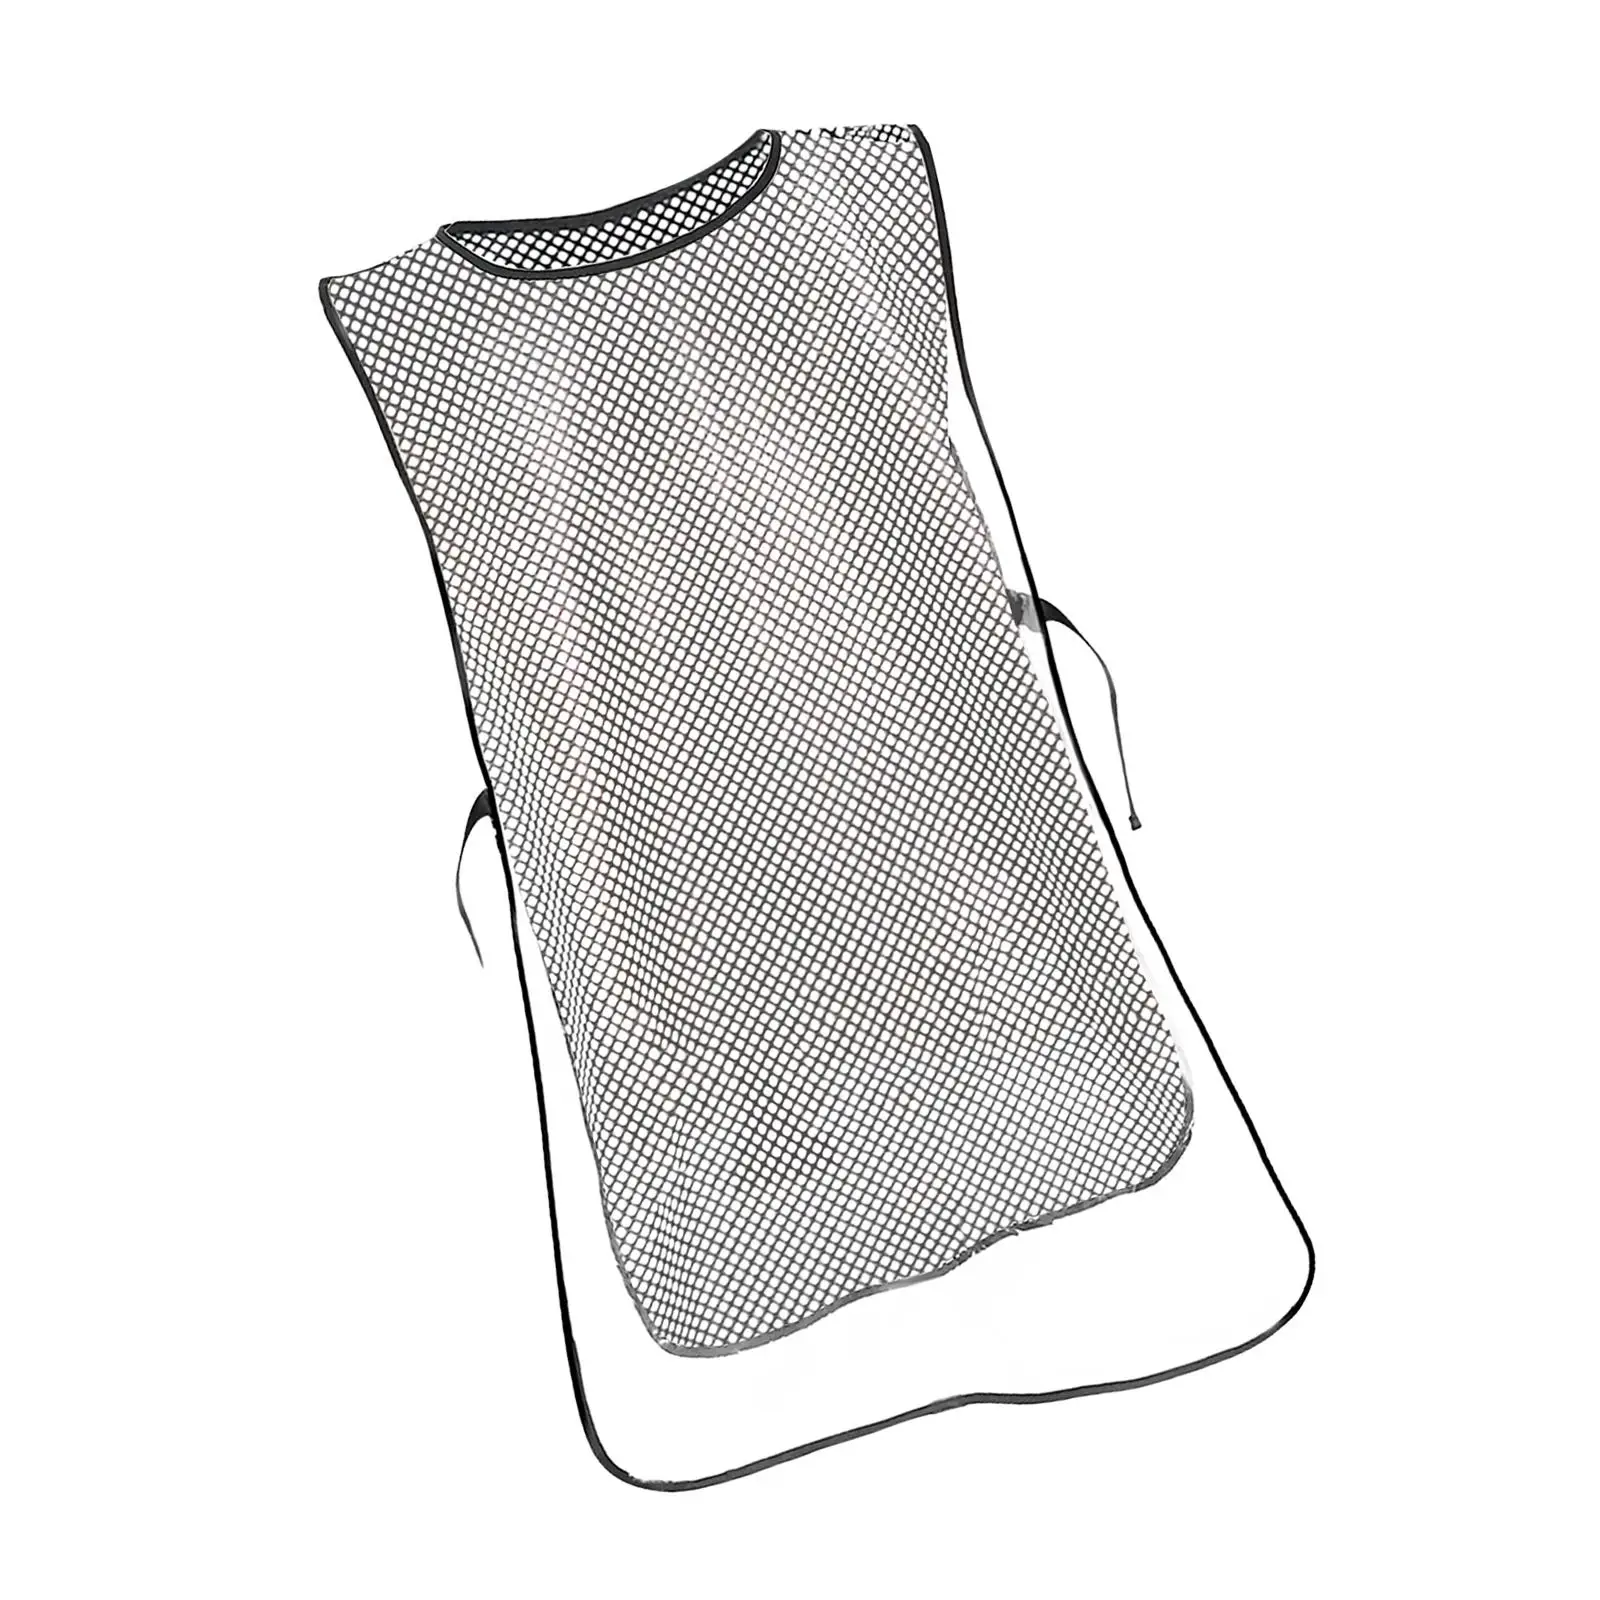 Transparent Apron Oilproof Lightweight Hair Salon Work Apron for Barber Stylist Accessories Nail Server Chef